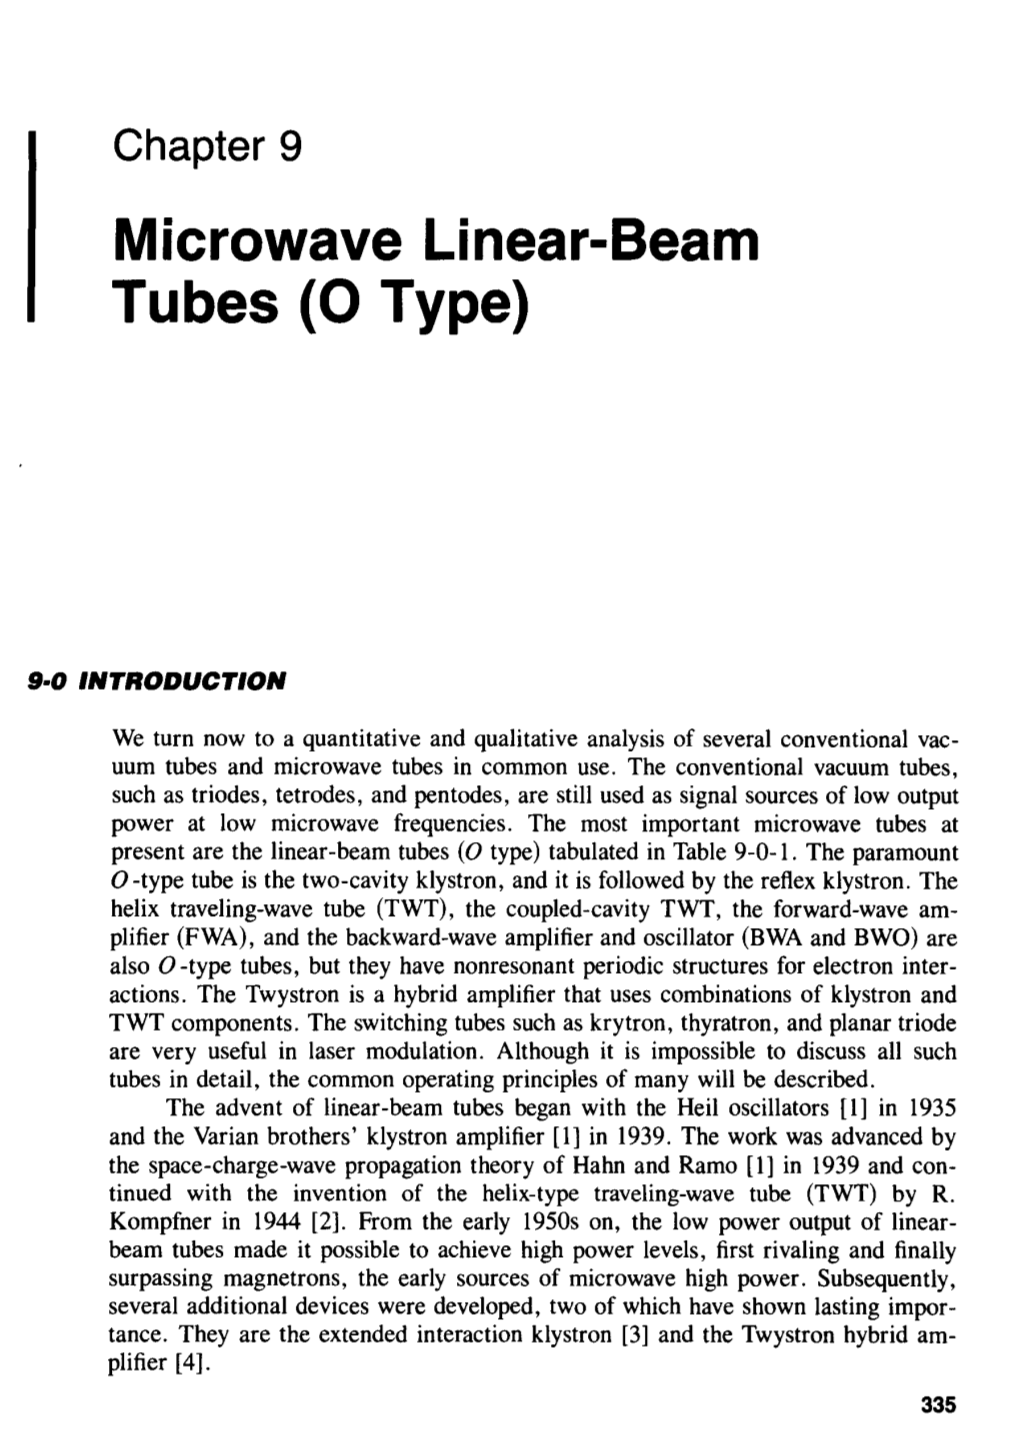 Chapter 9 Microwave Linear-Beam Tubes (0 Type)